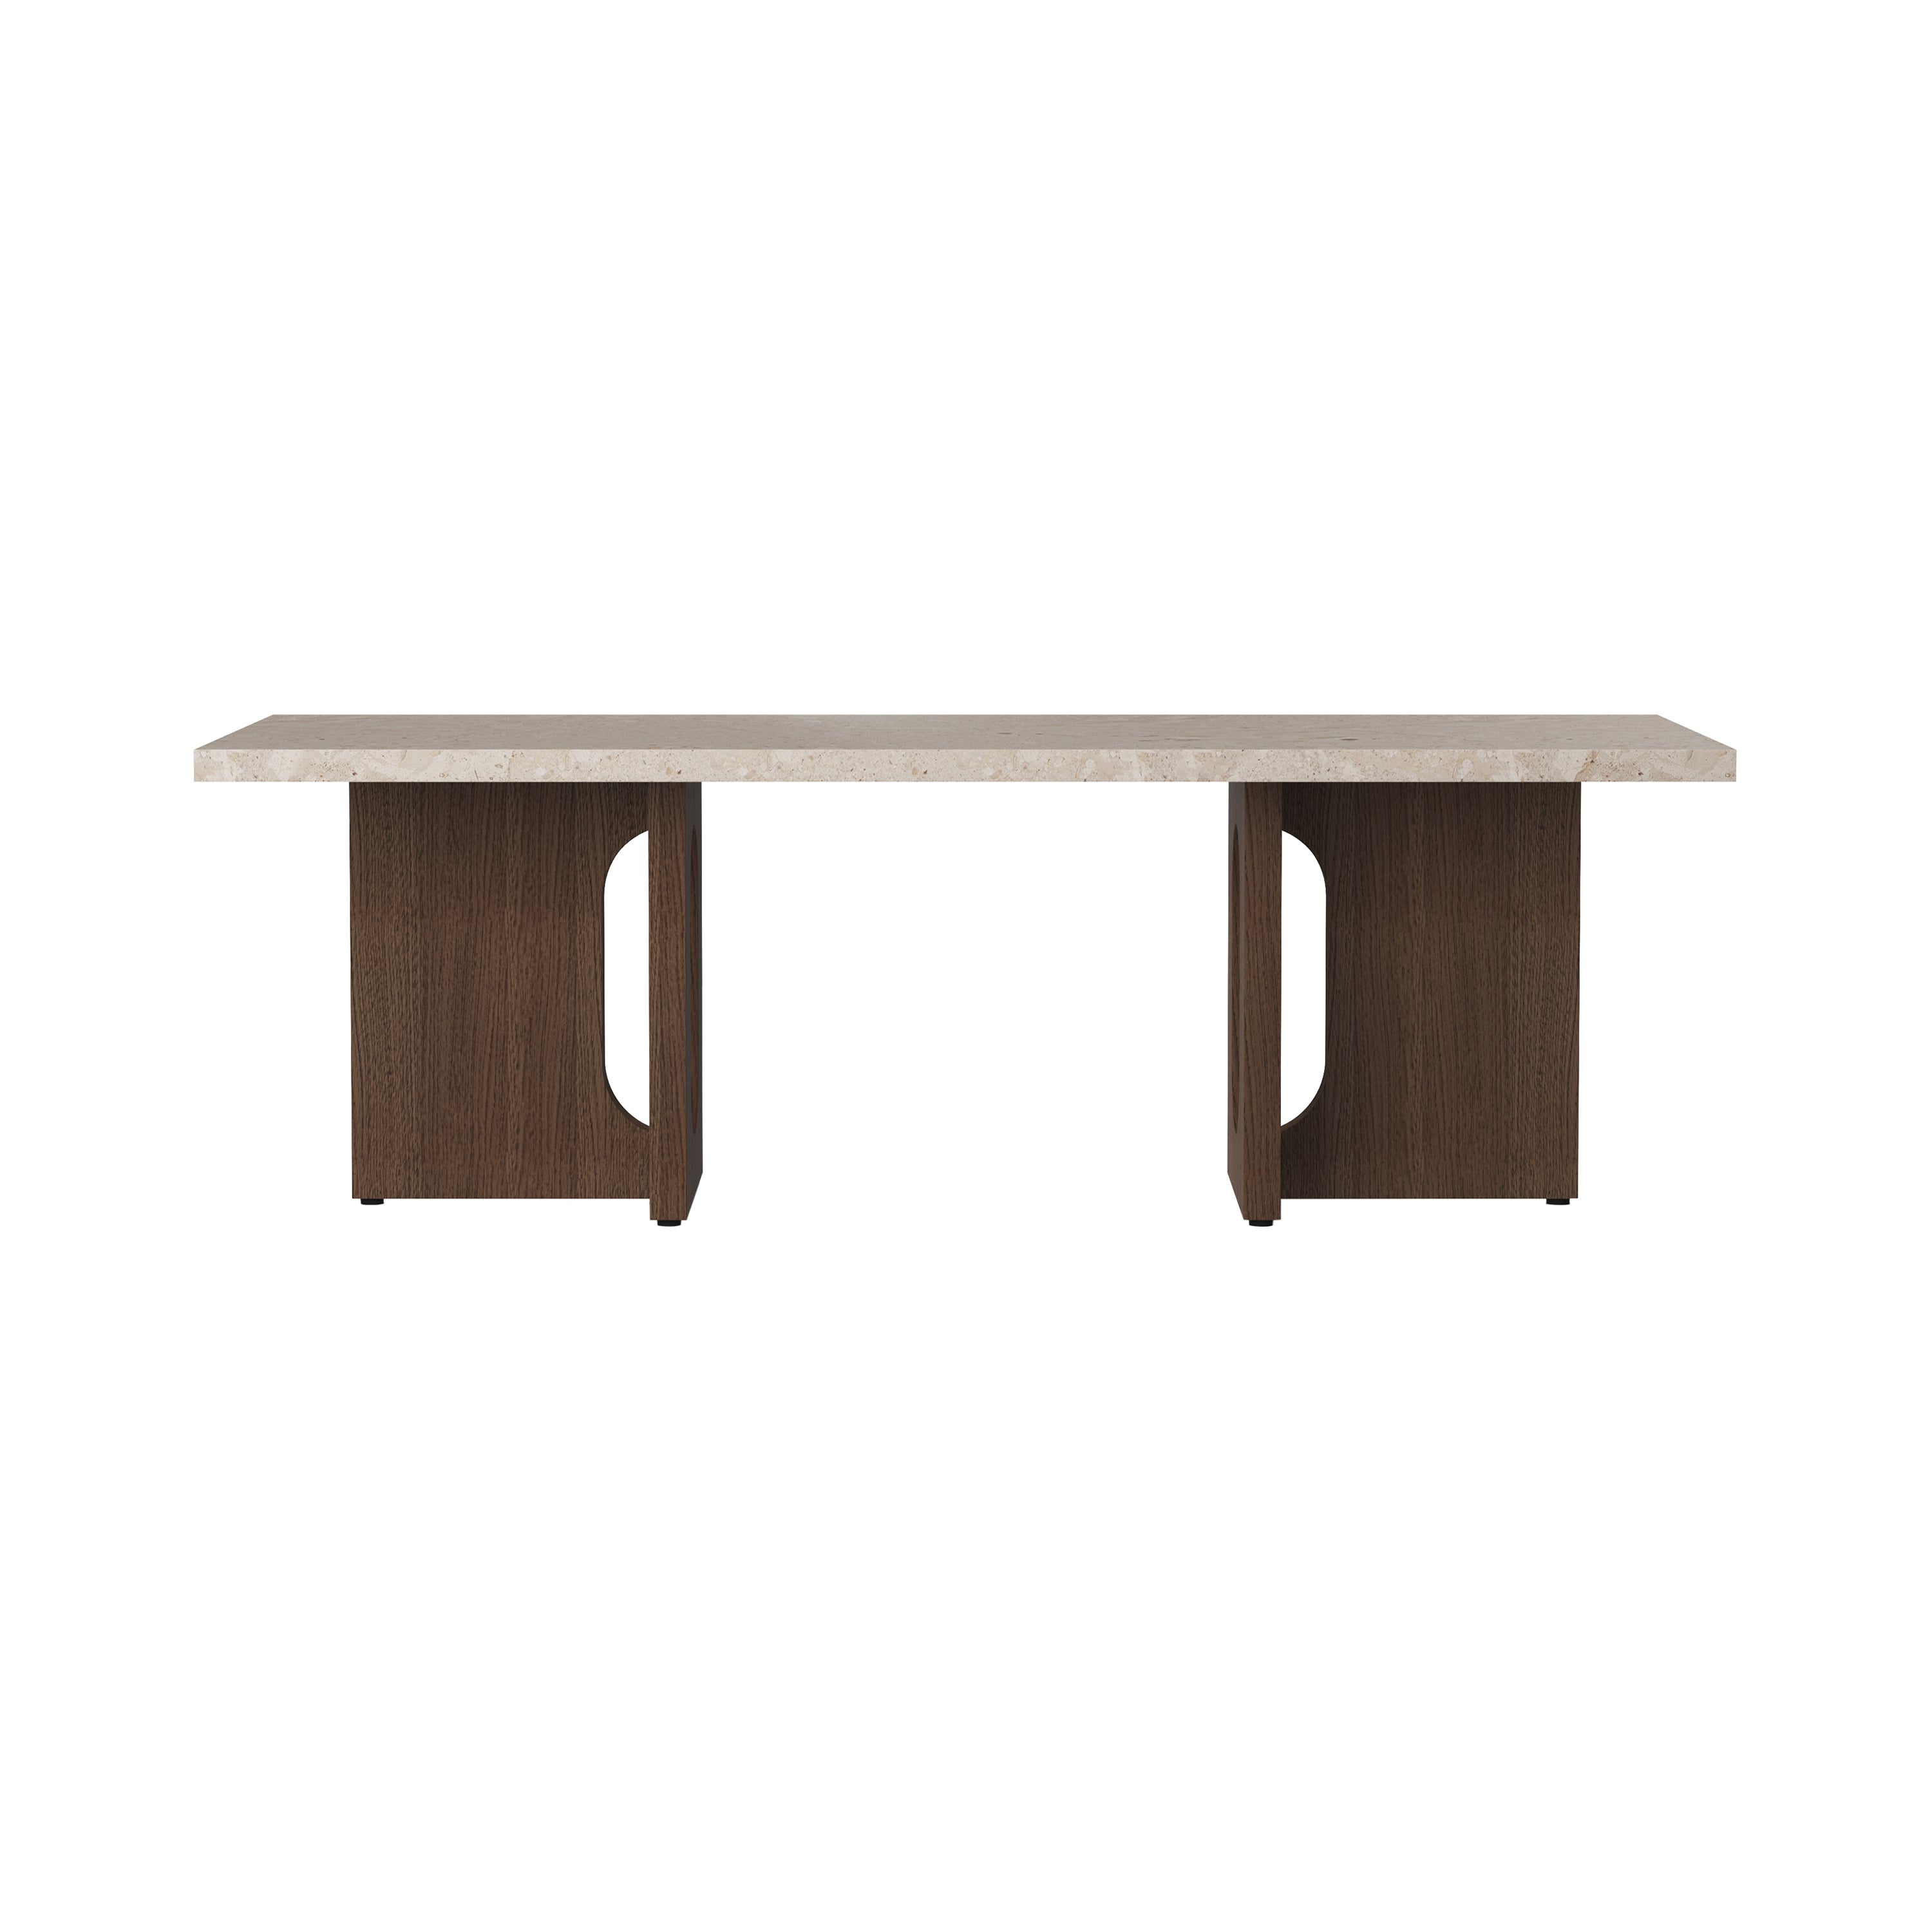 Androgyne Lounge Table: Dark Stained Oak + Kunis Breccia Sand Marble